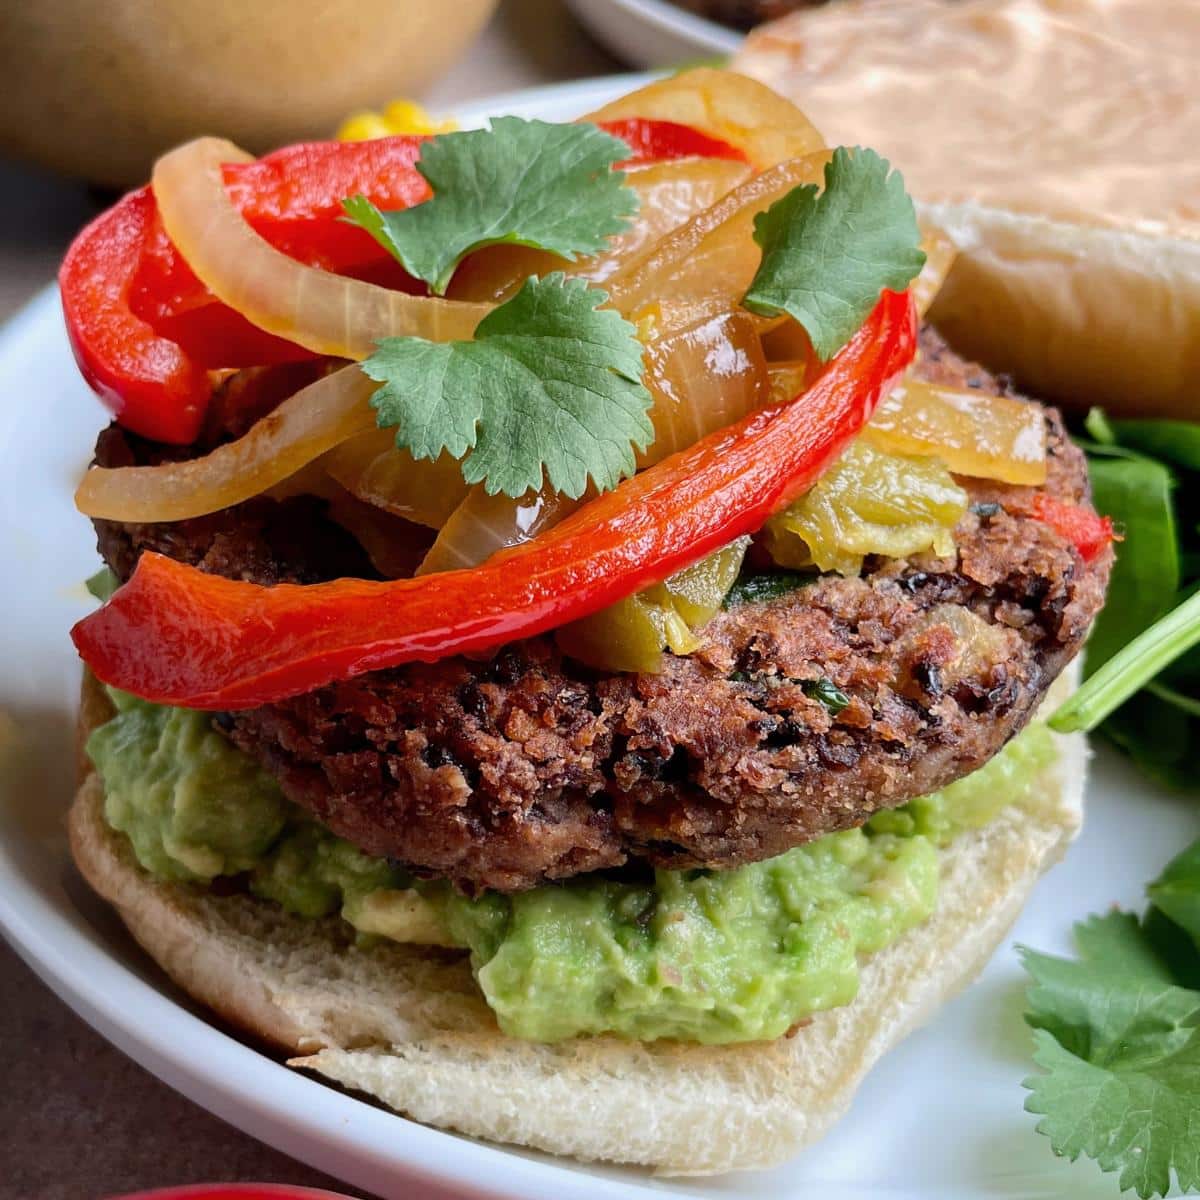 A black bean burger with peppers, onions, and avocado.